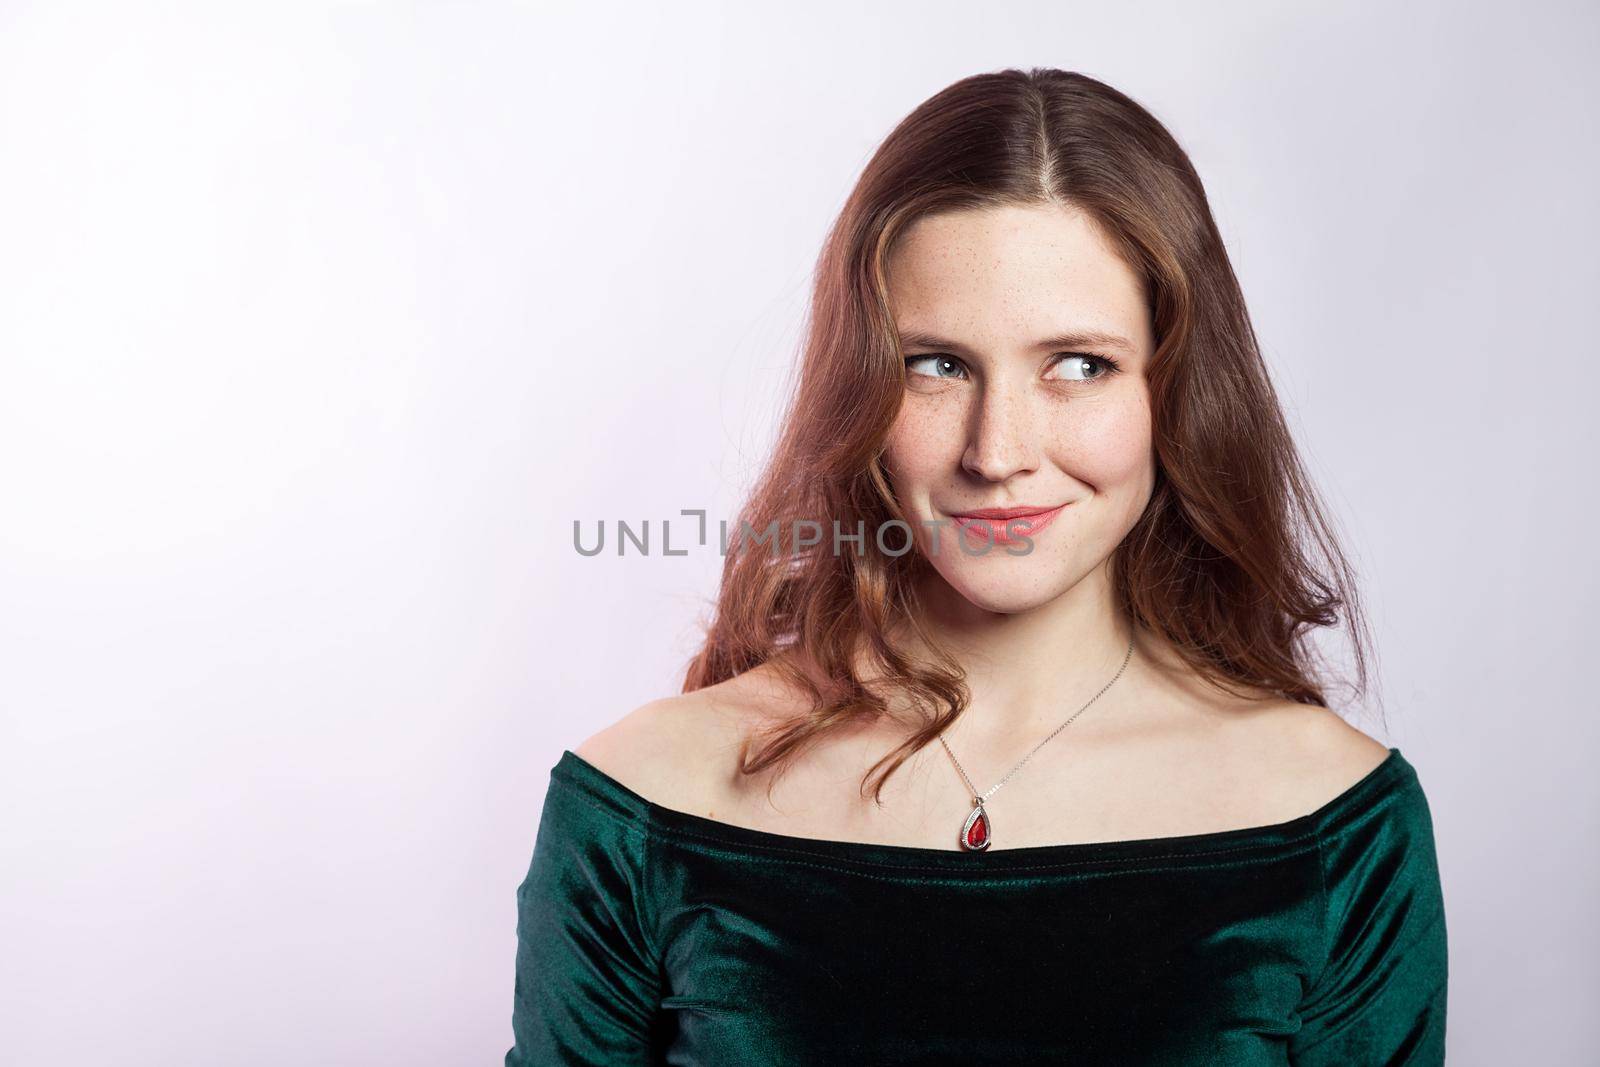 Portrait of thinkful woman with freckles and classic green dress. studio shot on silver gray background.